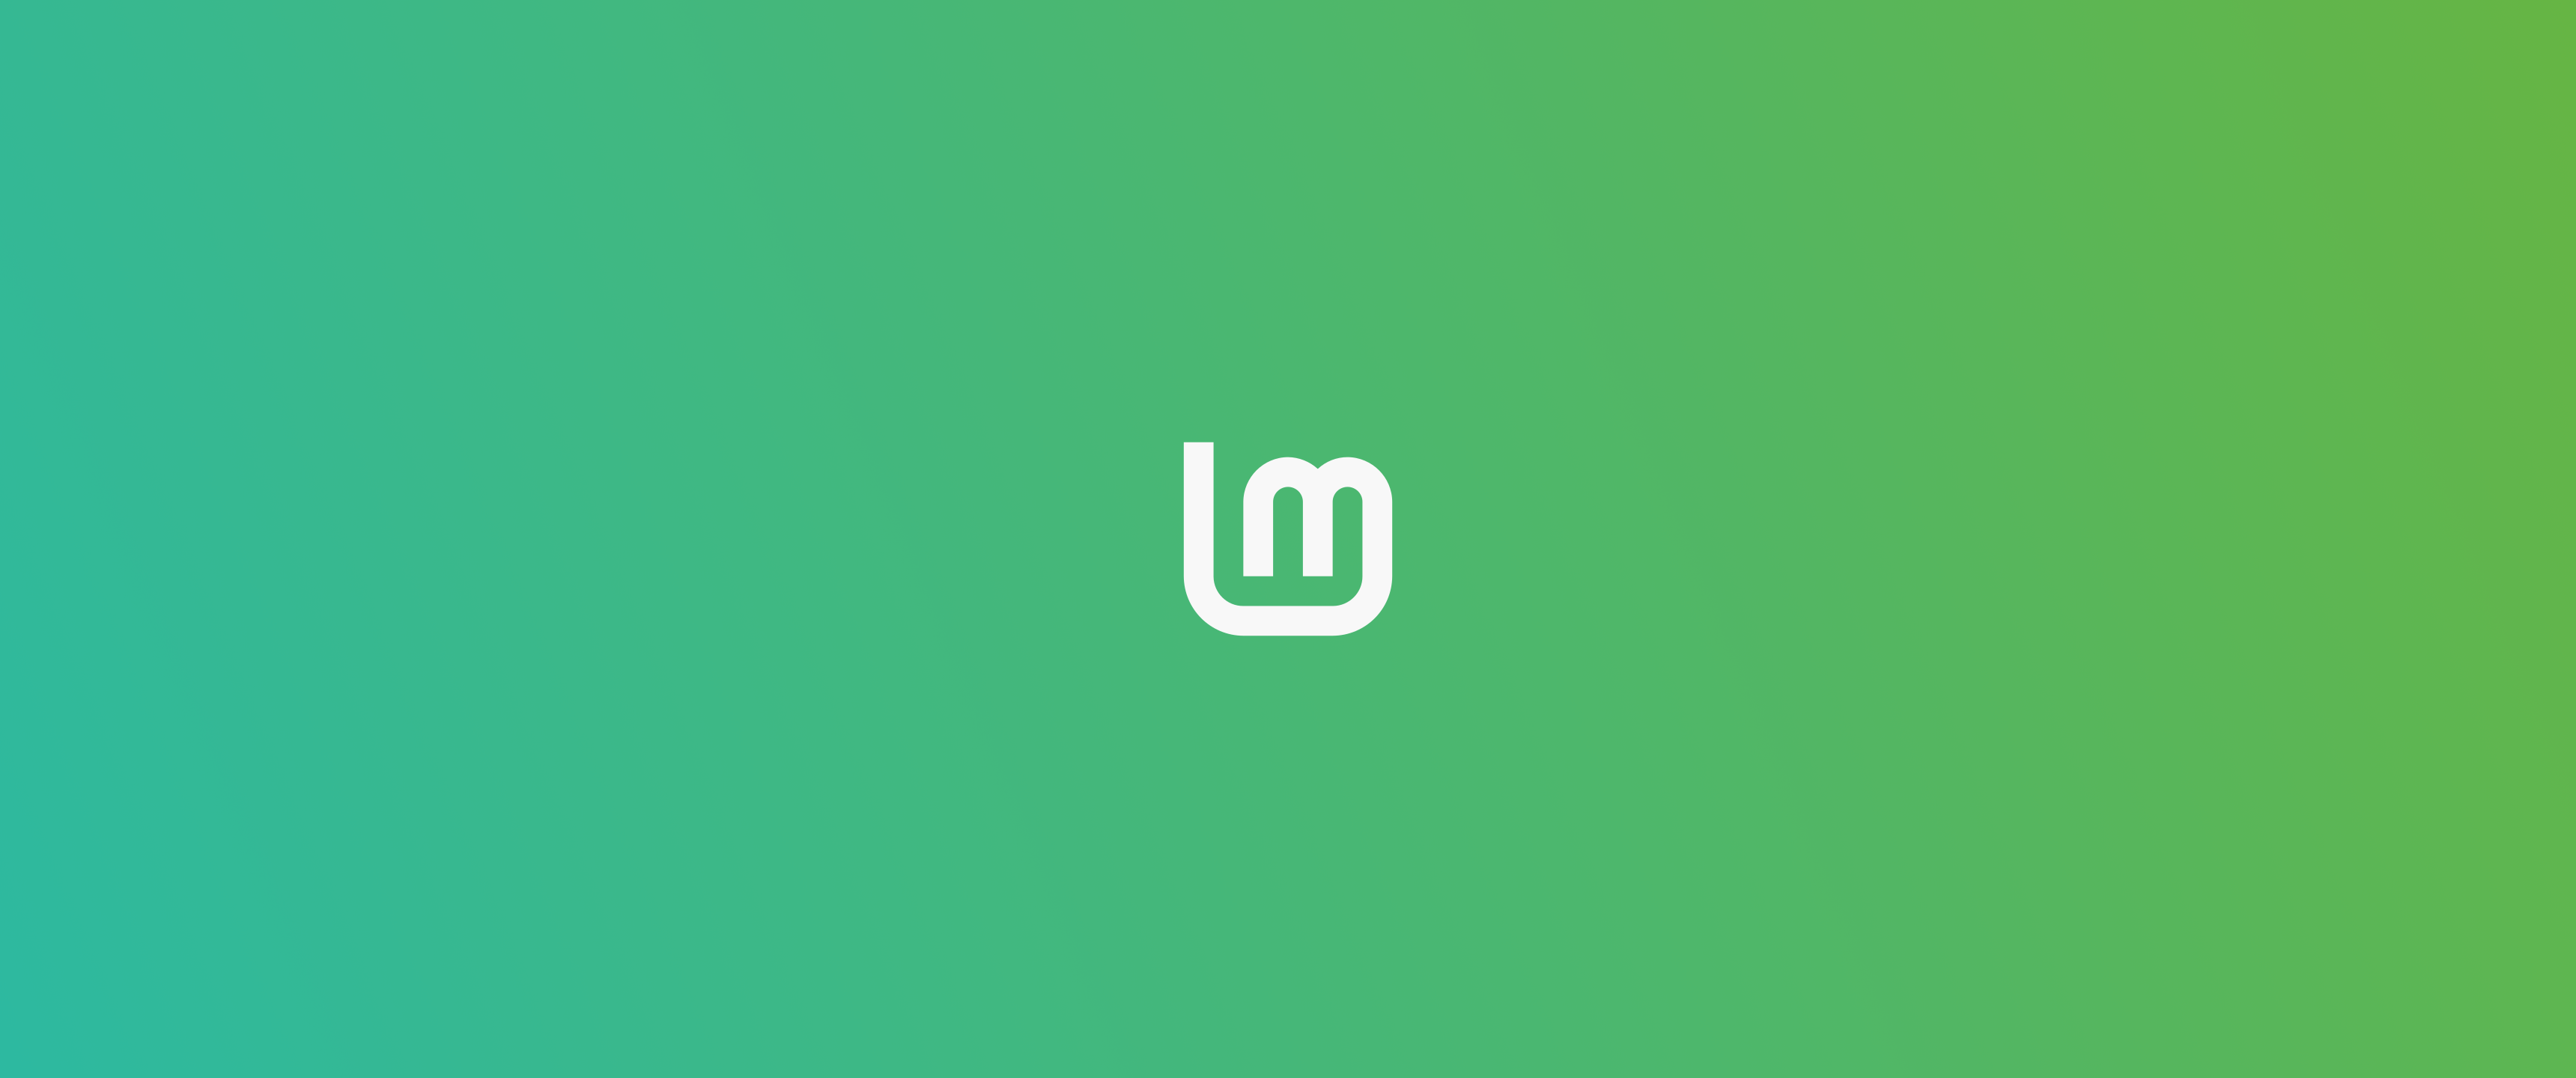 Linux Minimalism Gradient Linux Mint Operating System Simple Background Logo 3440x1440